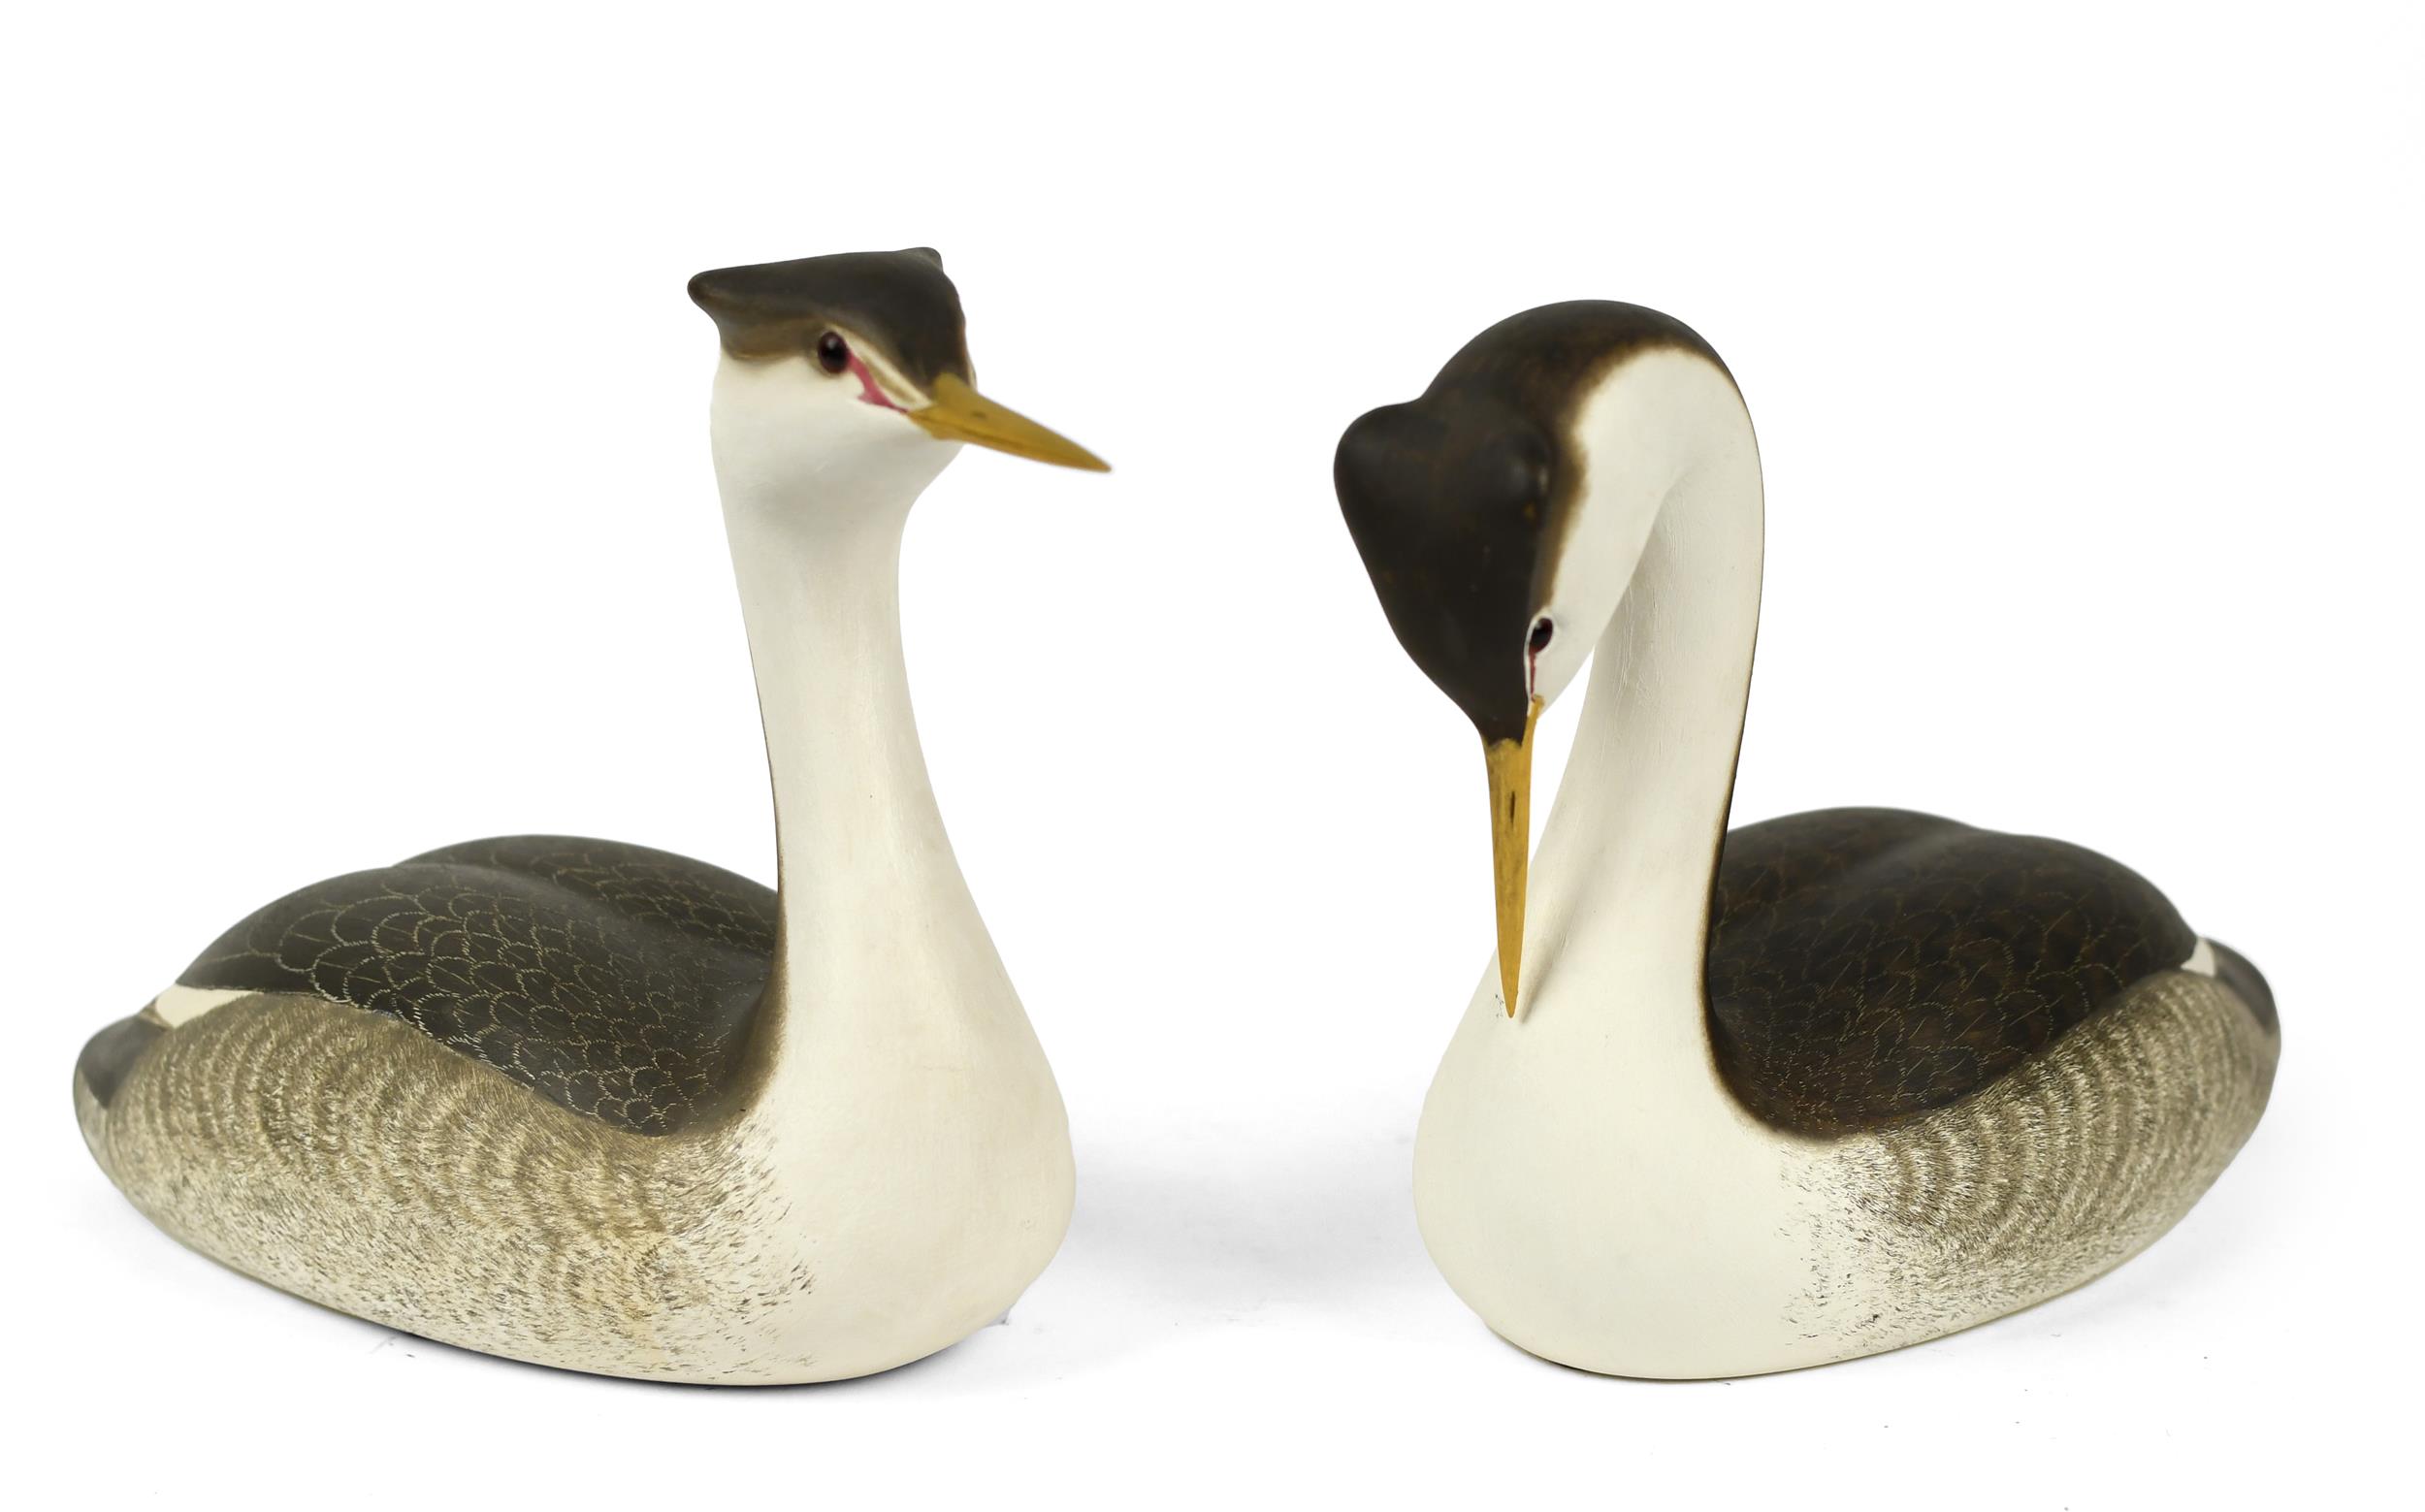 PAIR OF CARVED DECOYS WESTERN 3b053d